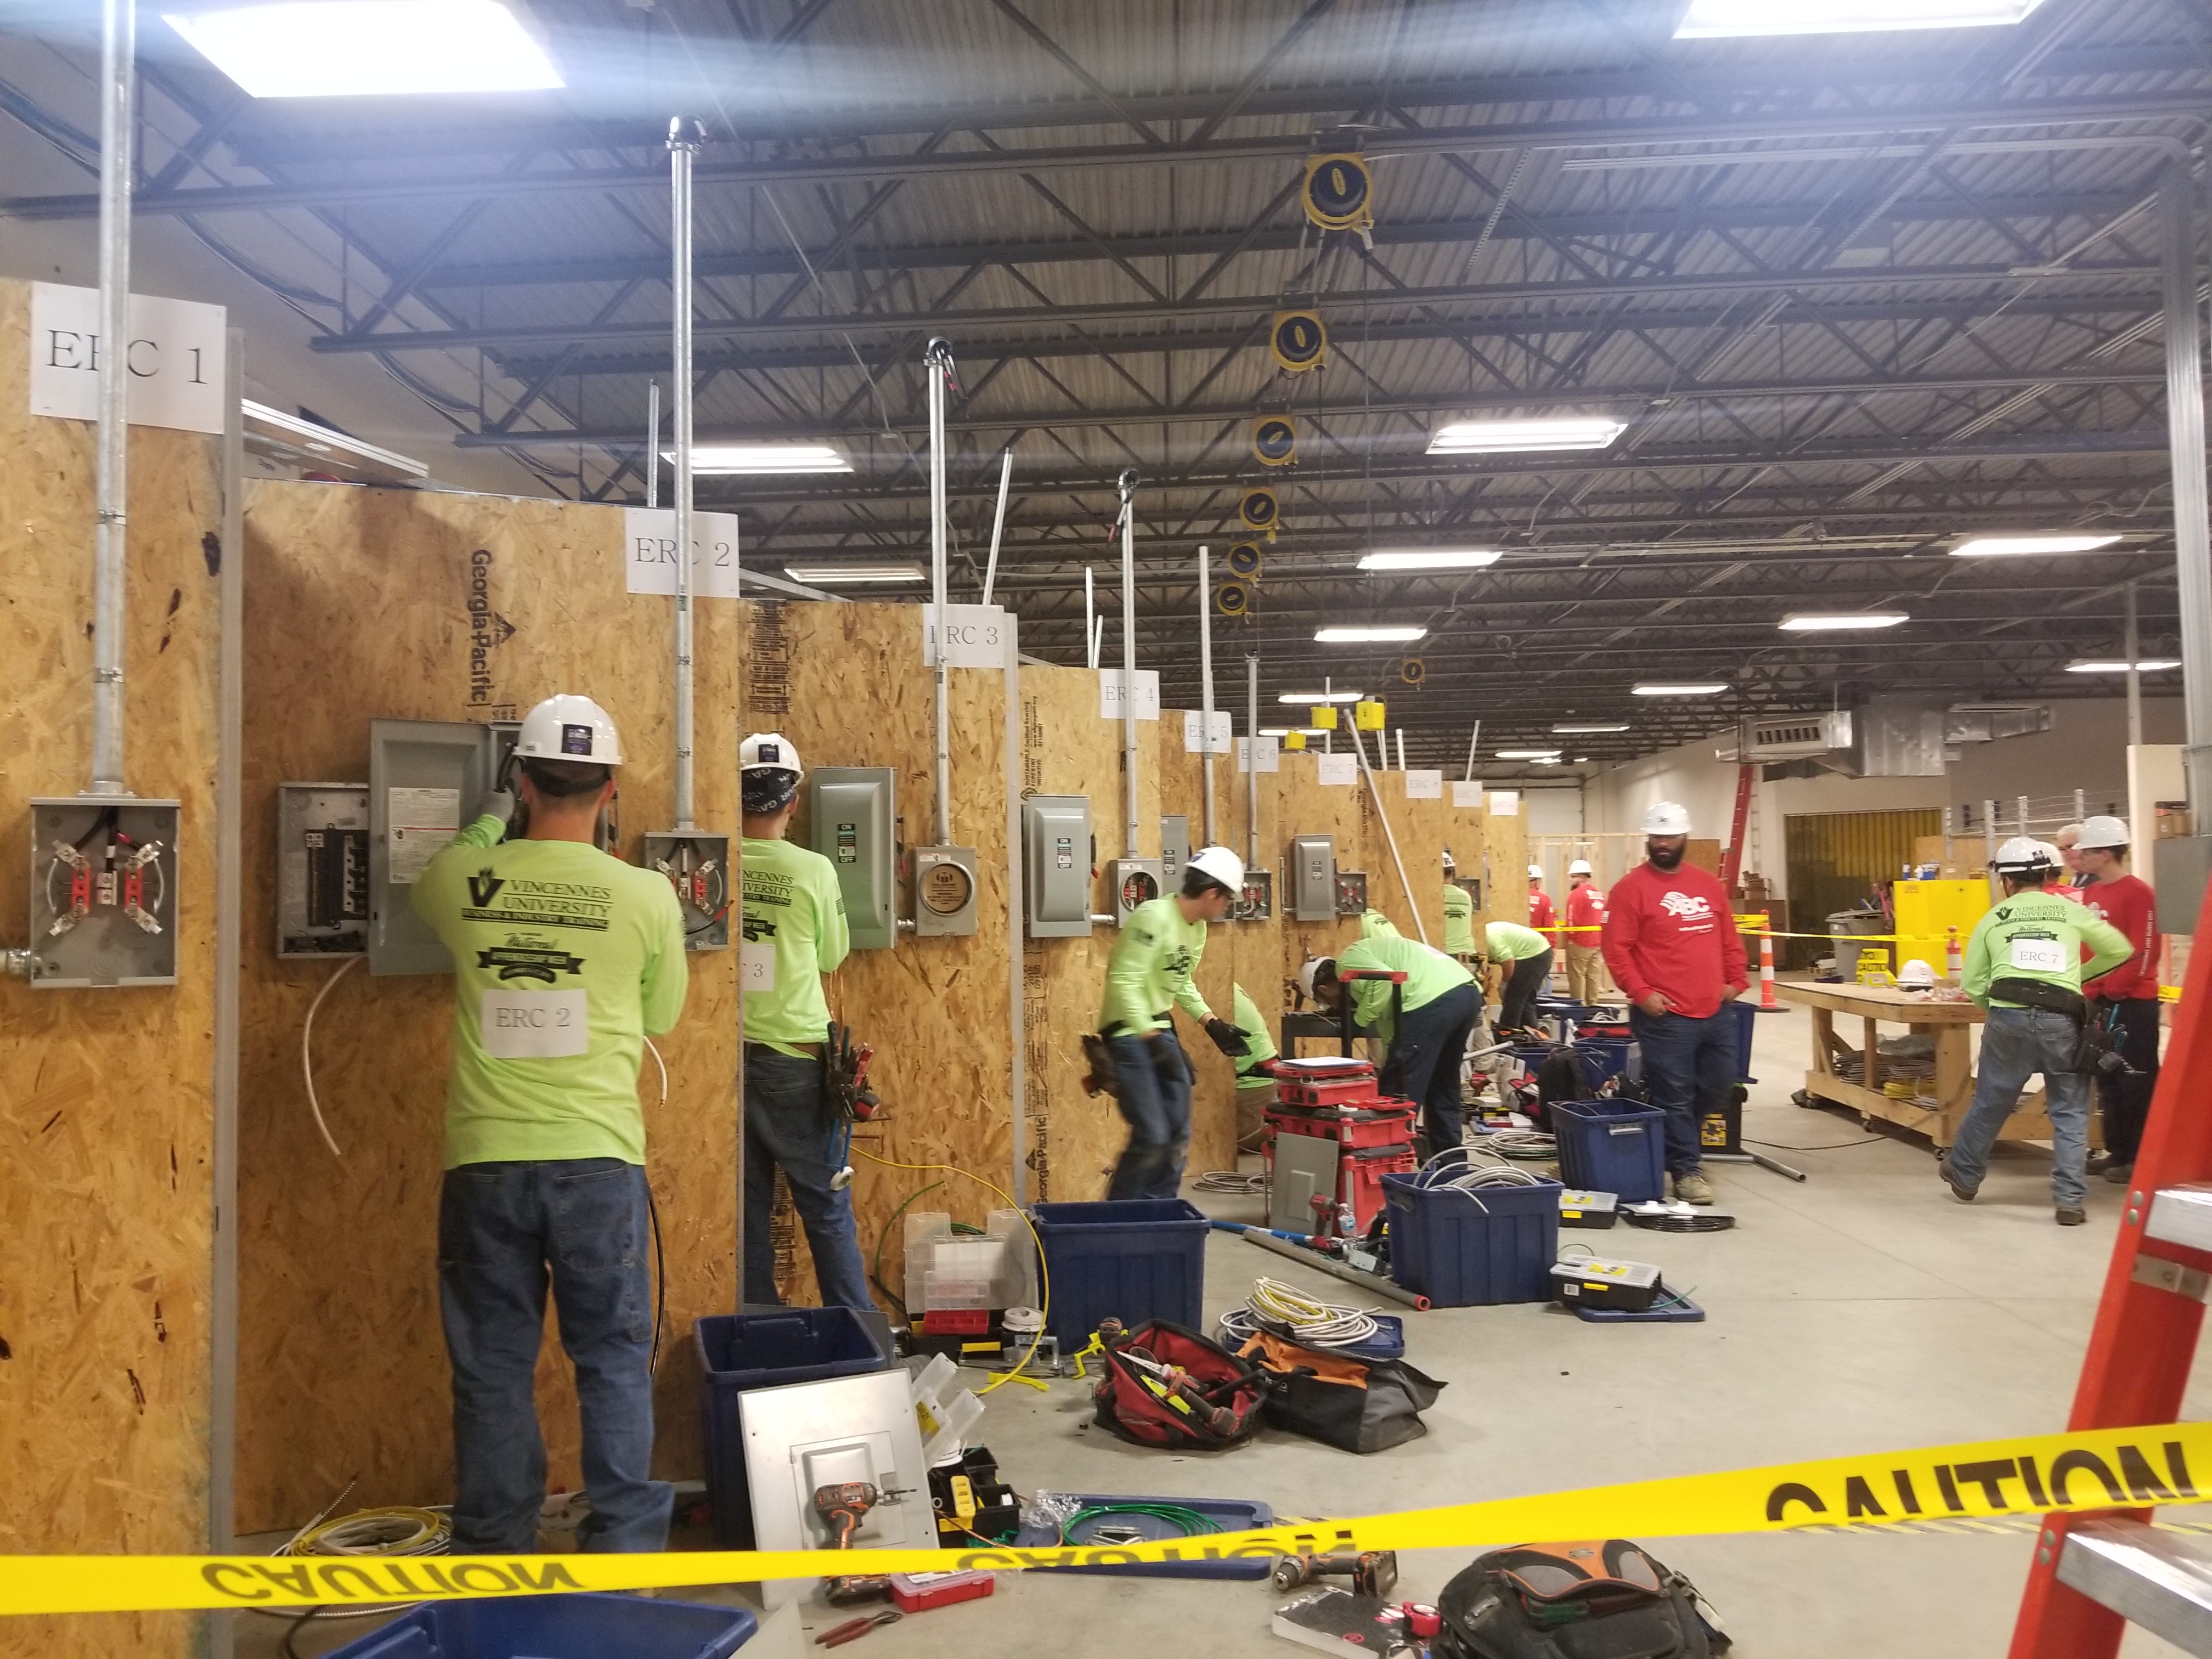 People in hard hats work at individual electrical panels with equipment around them while Instructors look on.